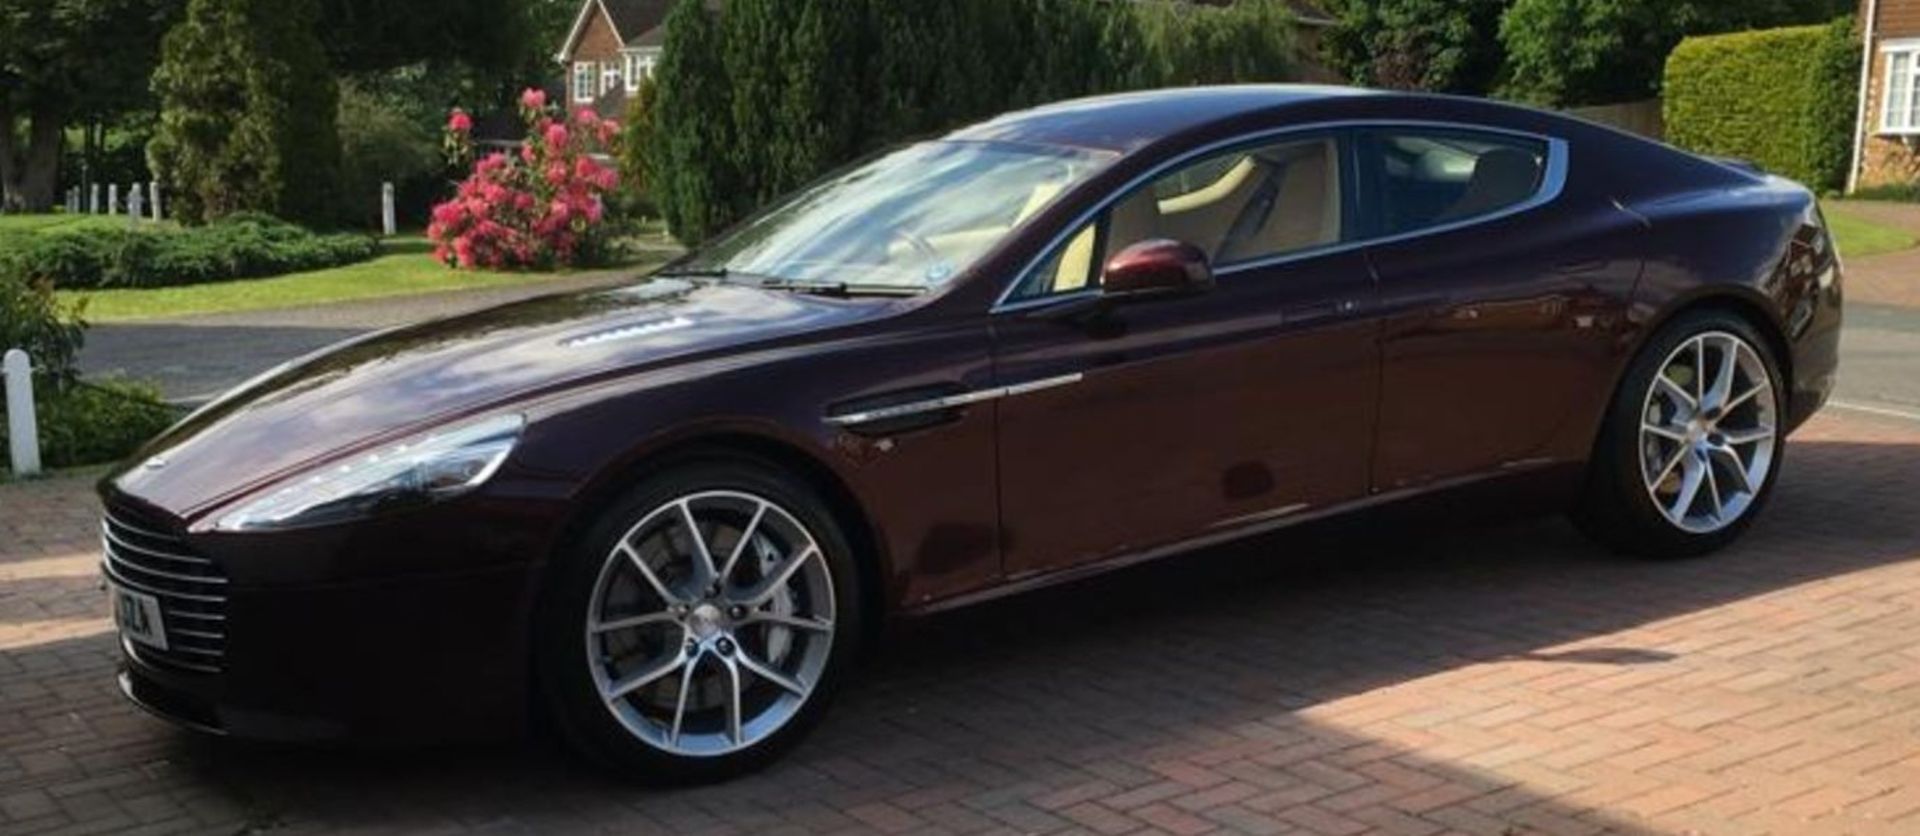 2015 ASTON MARTIN RAPIDE S V12 AUTO RED HATCHBACK, 15400 MILES, SHOWROOM CONDITION - Image 6 of 20